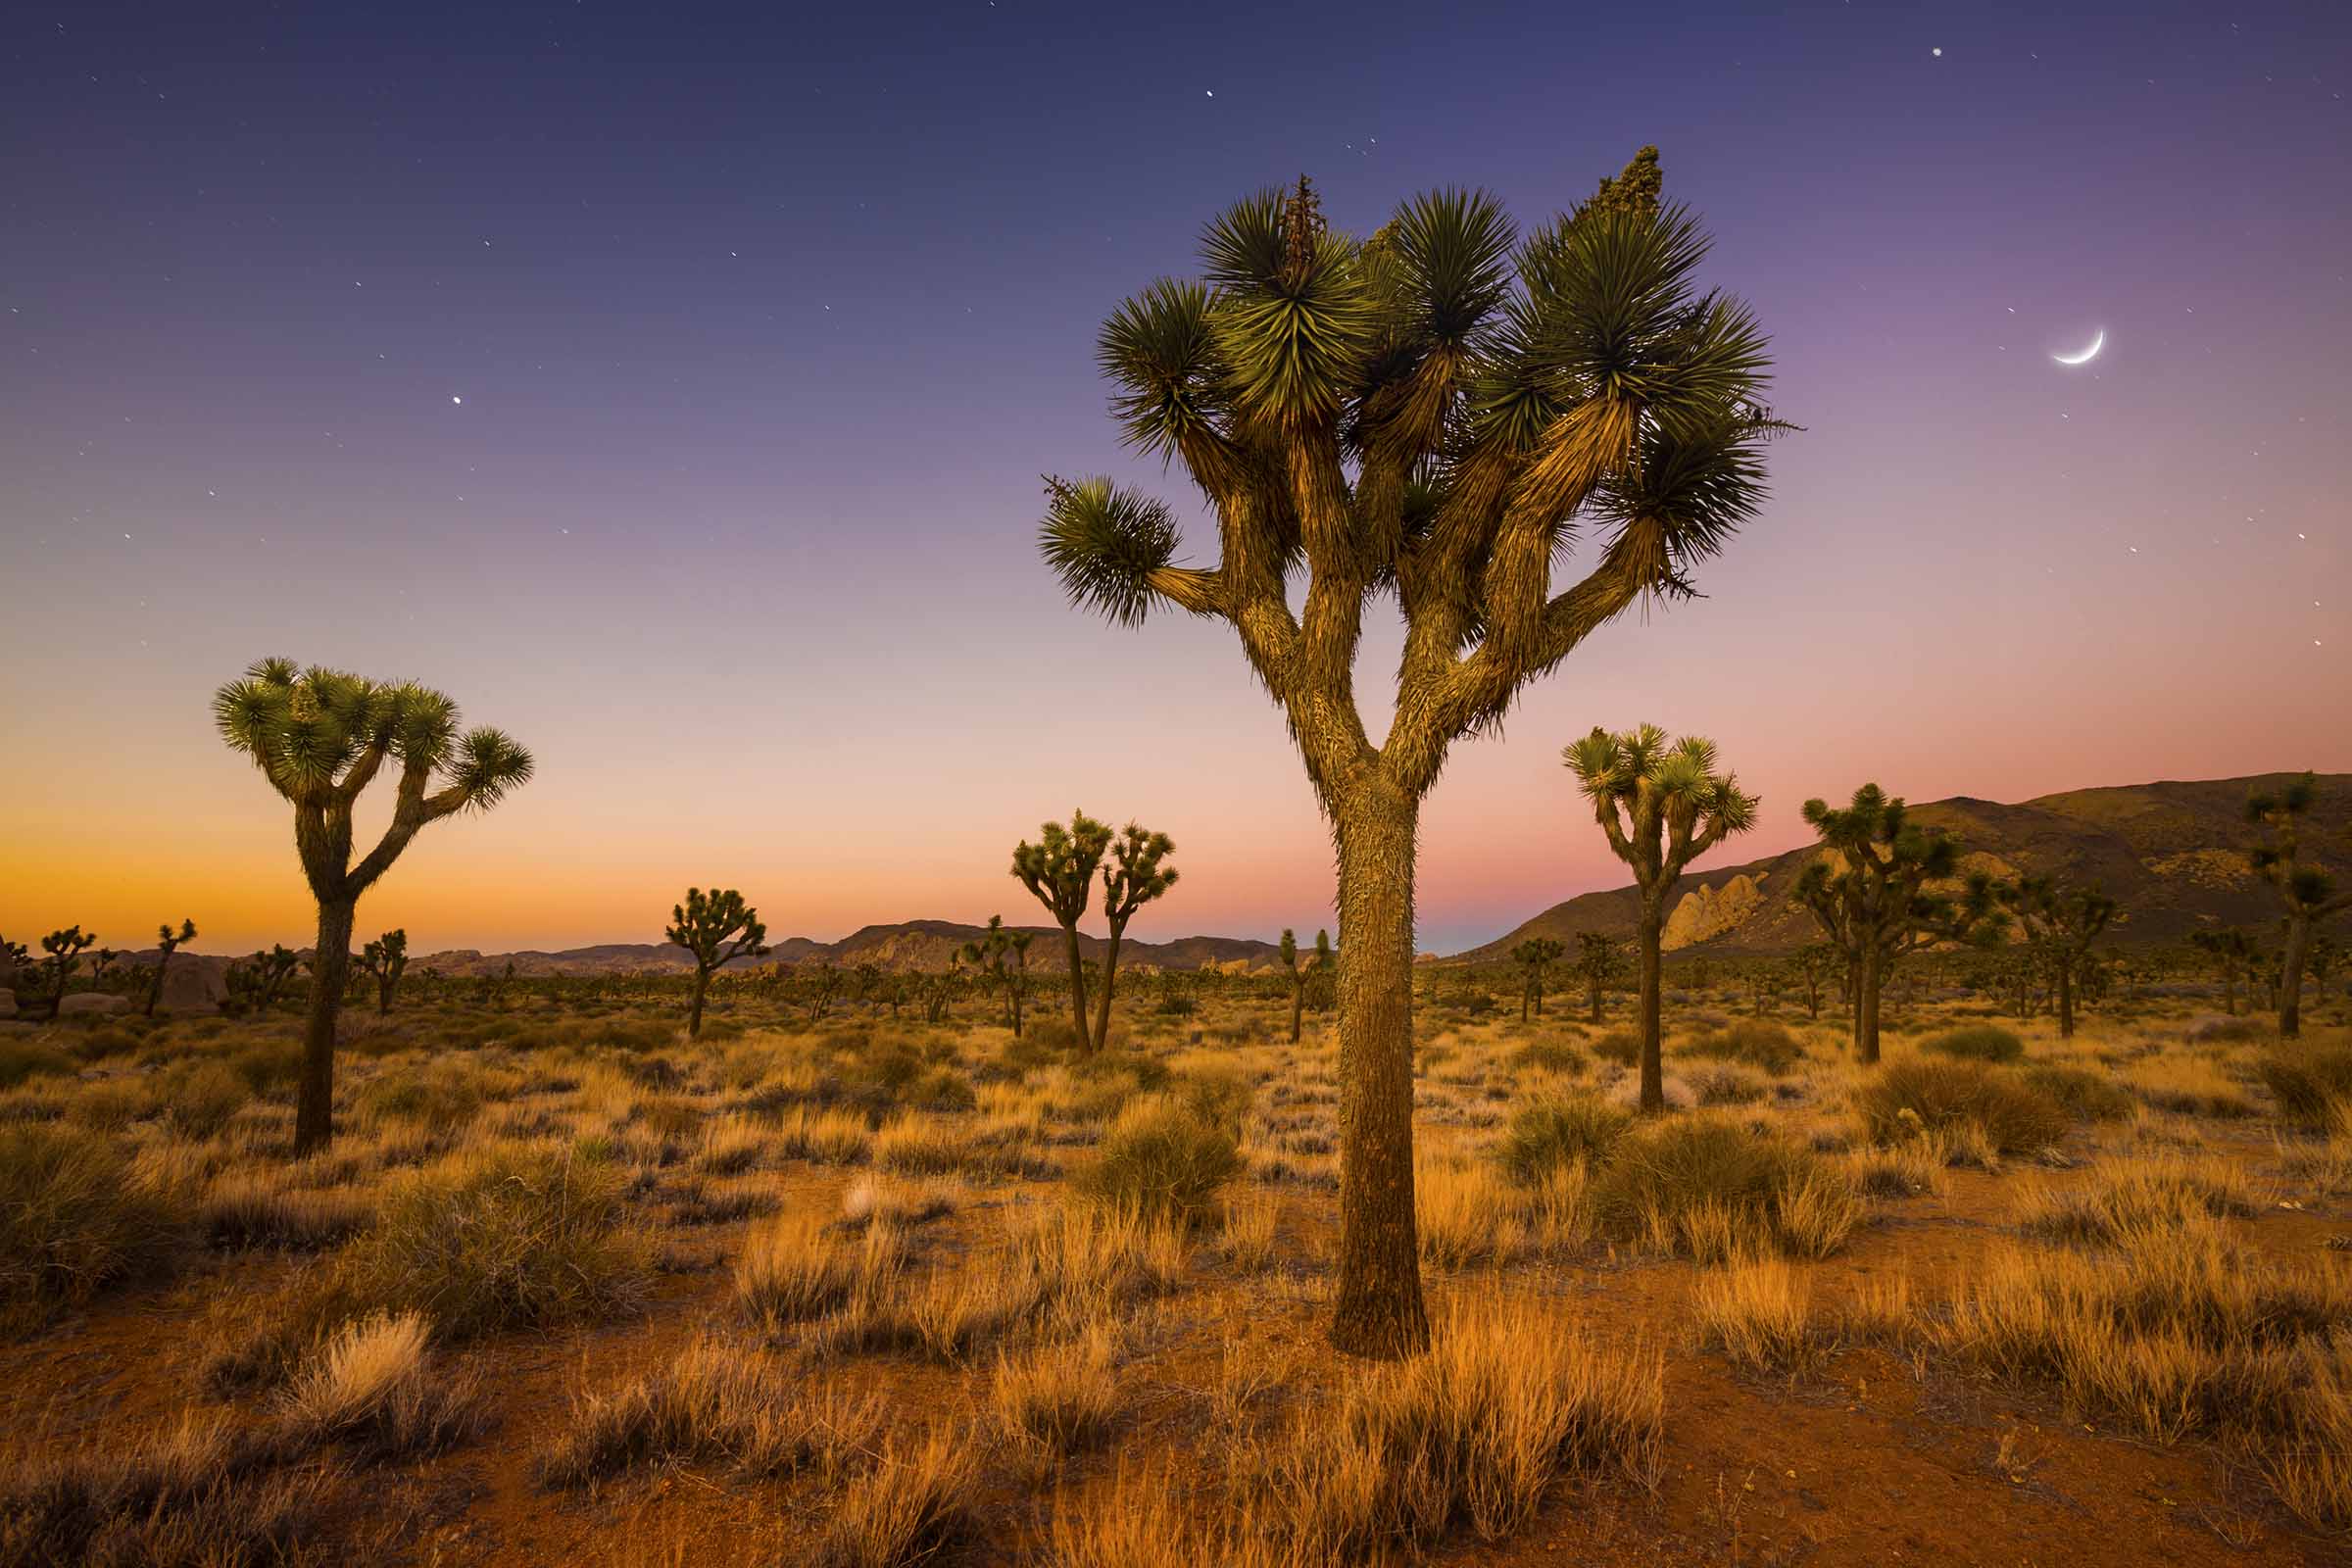 Valley of Joshua Trees at Sunset